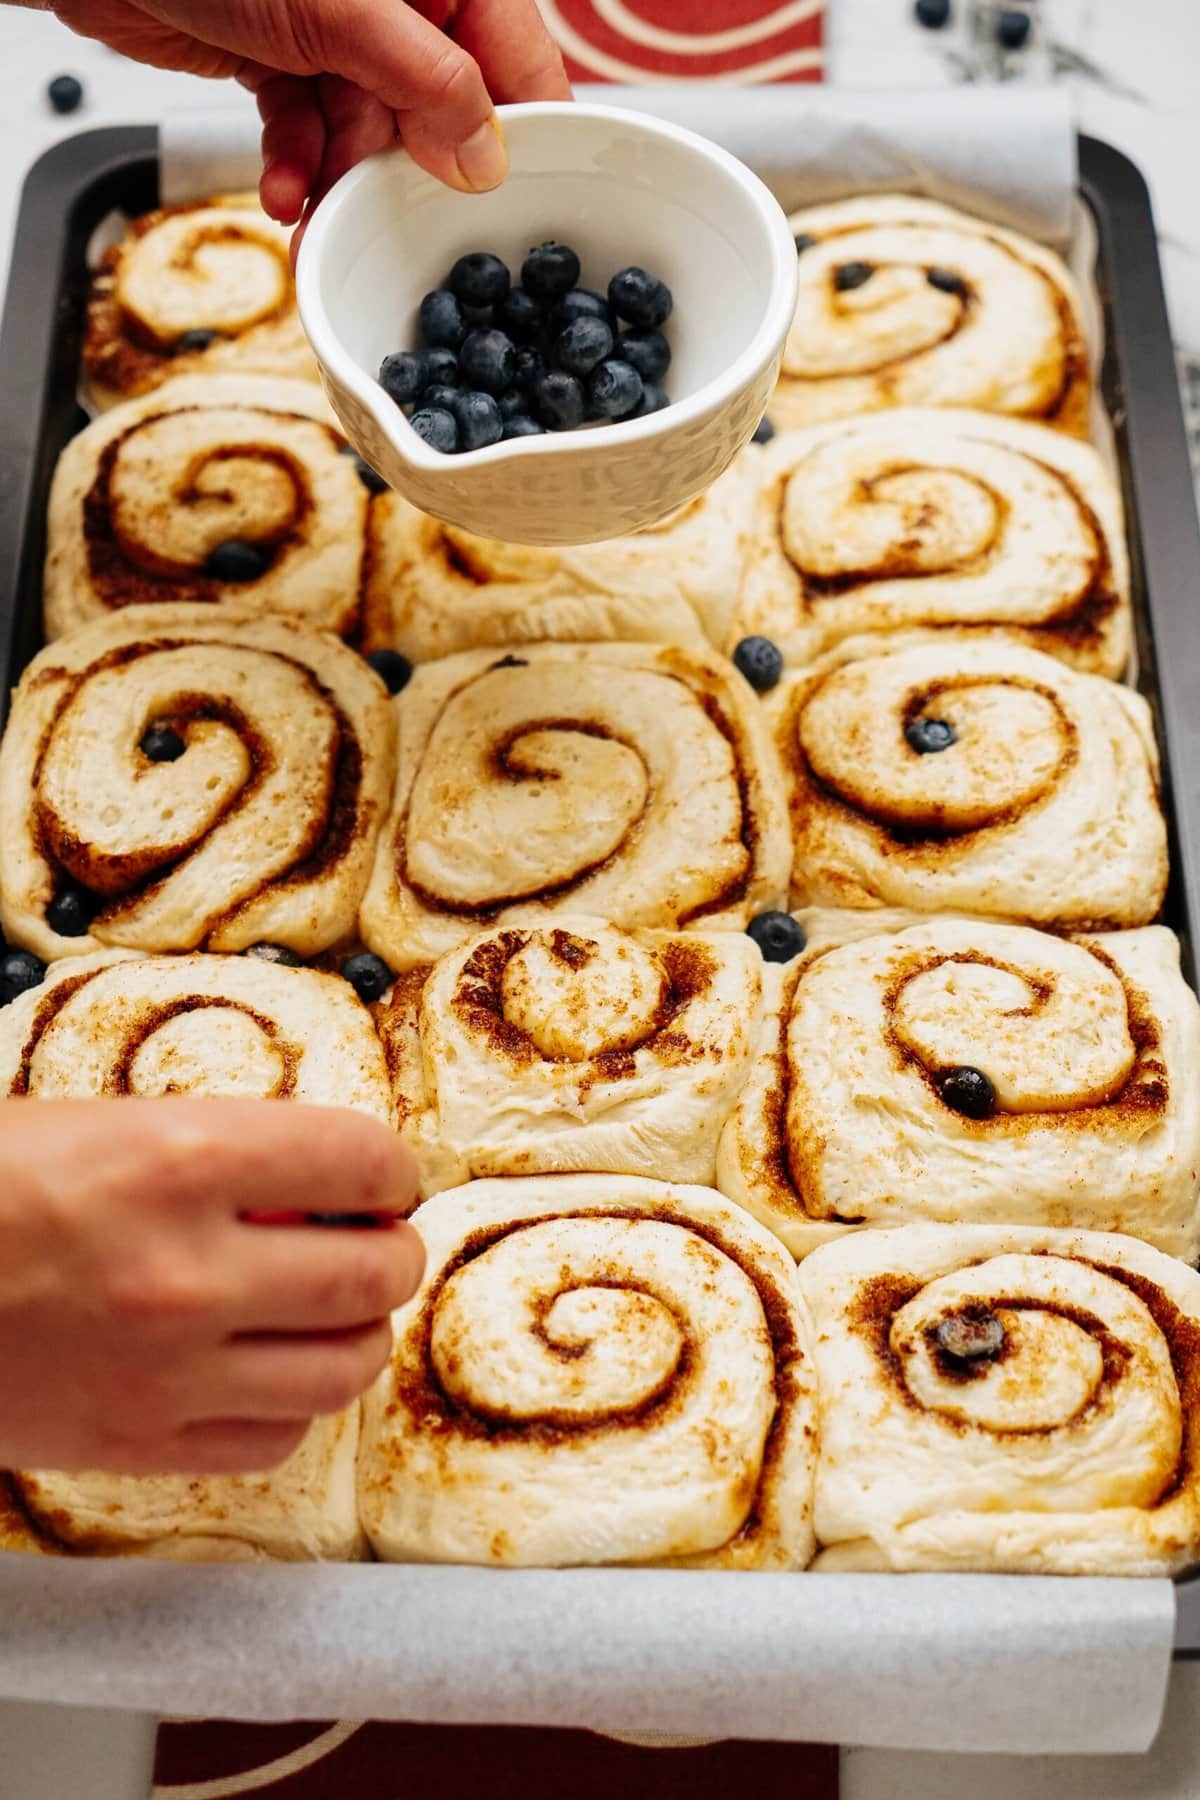 A person is placing blueberries into the center of a tray of unbaked cinnamon rolls, adding a delightful twist to the classic pastry.